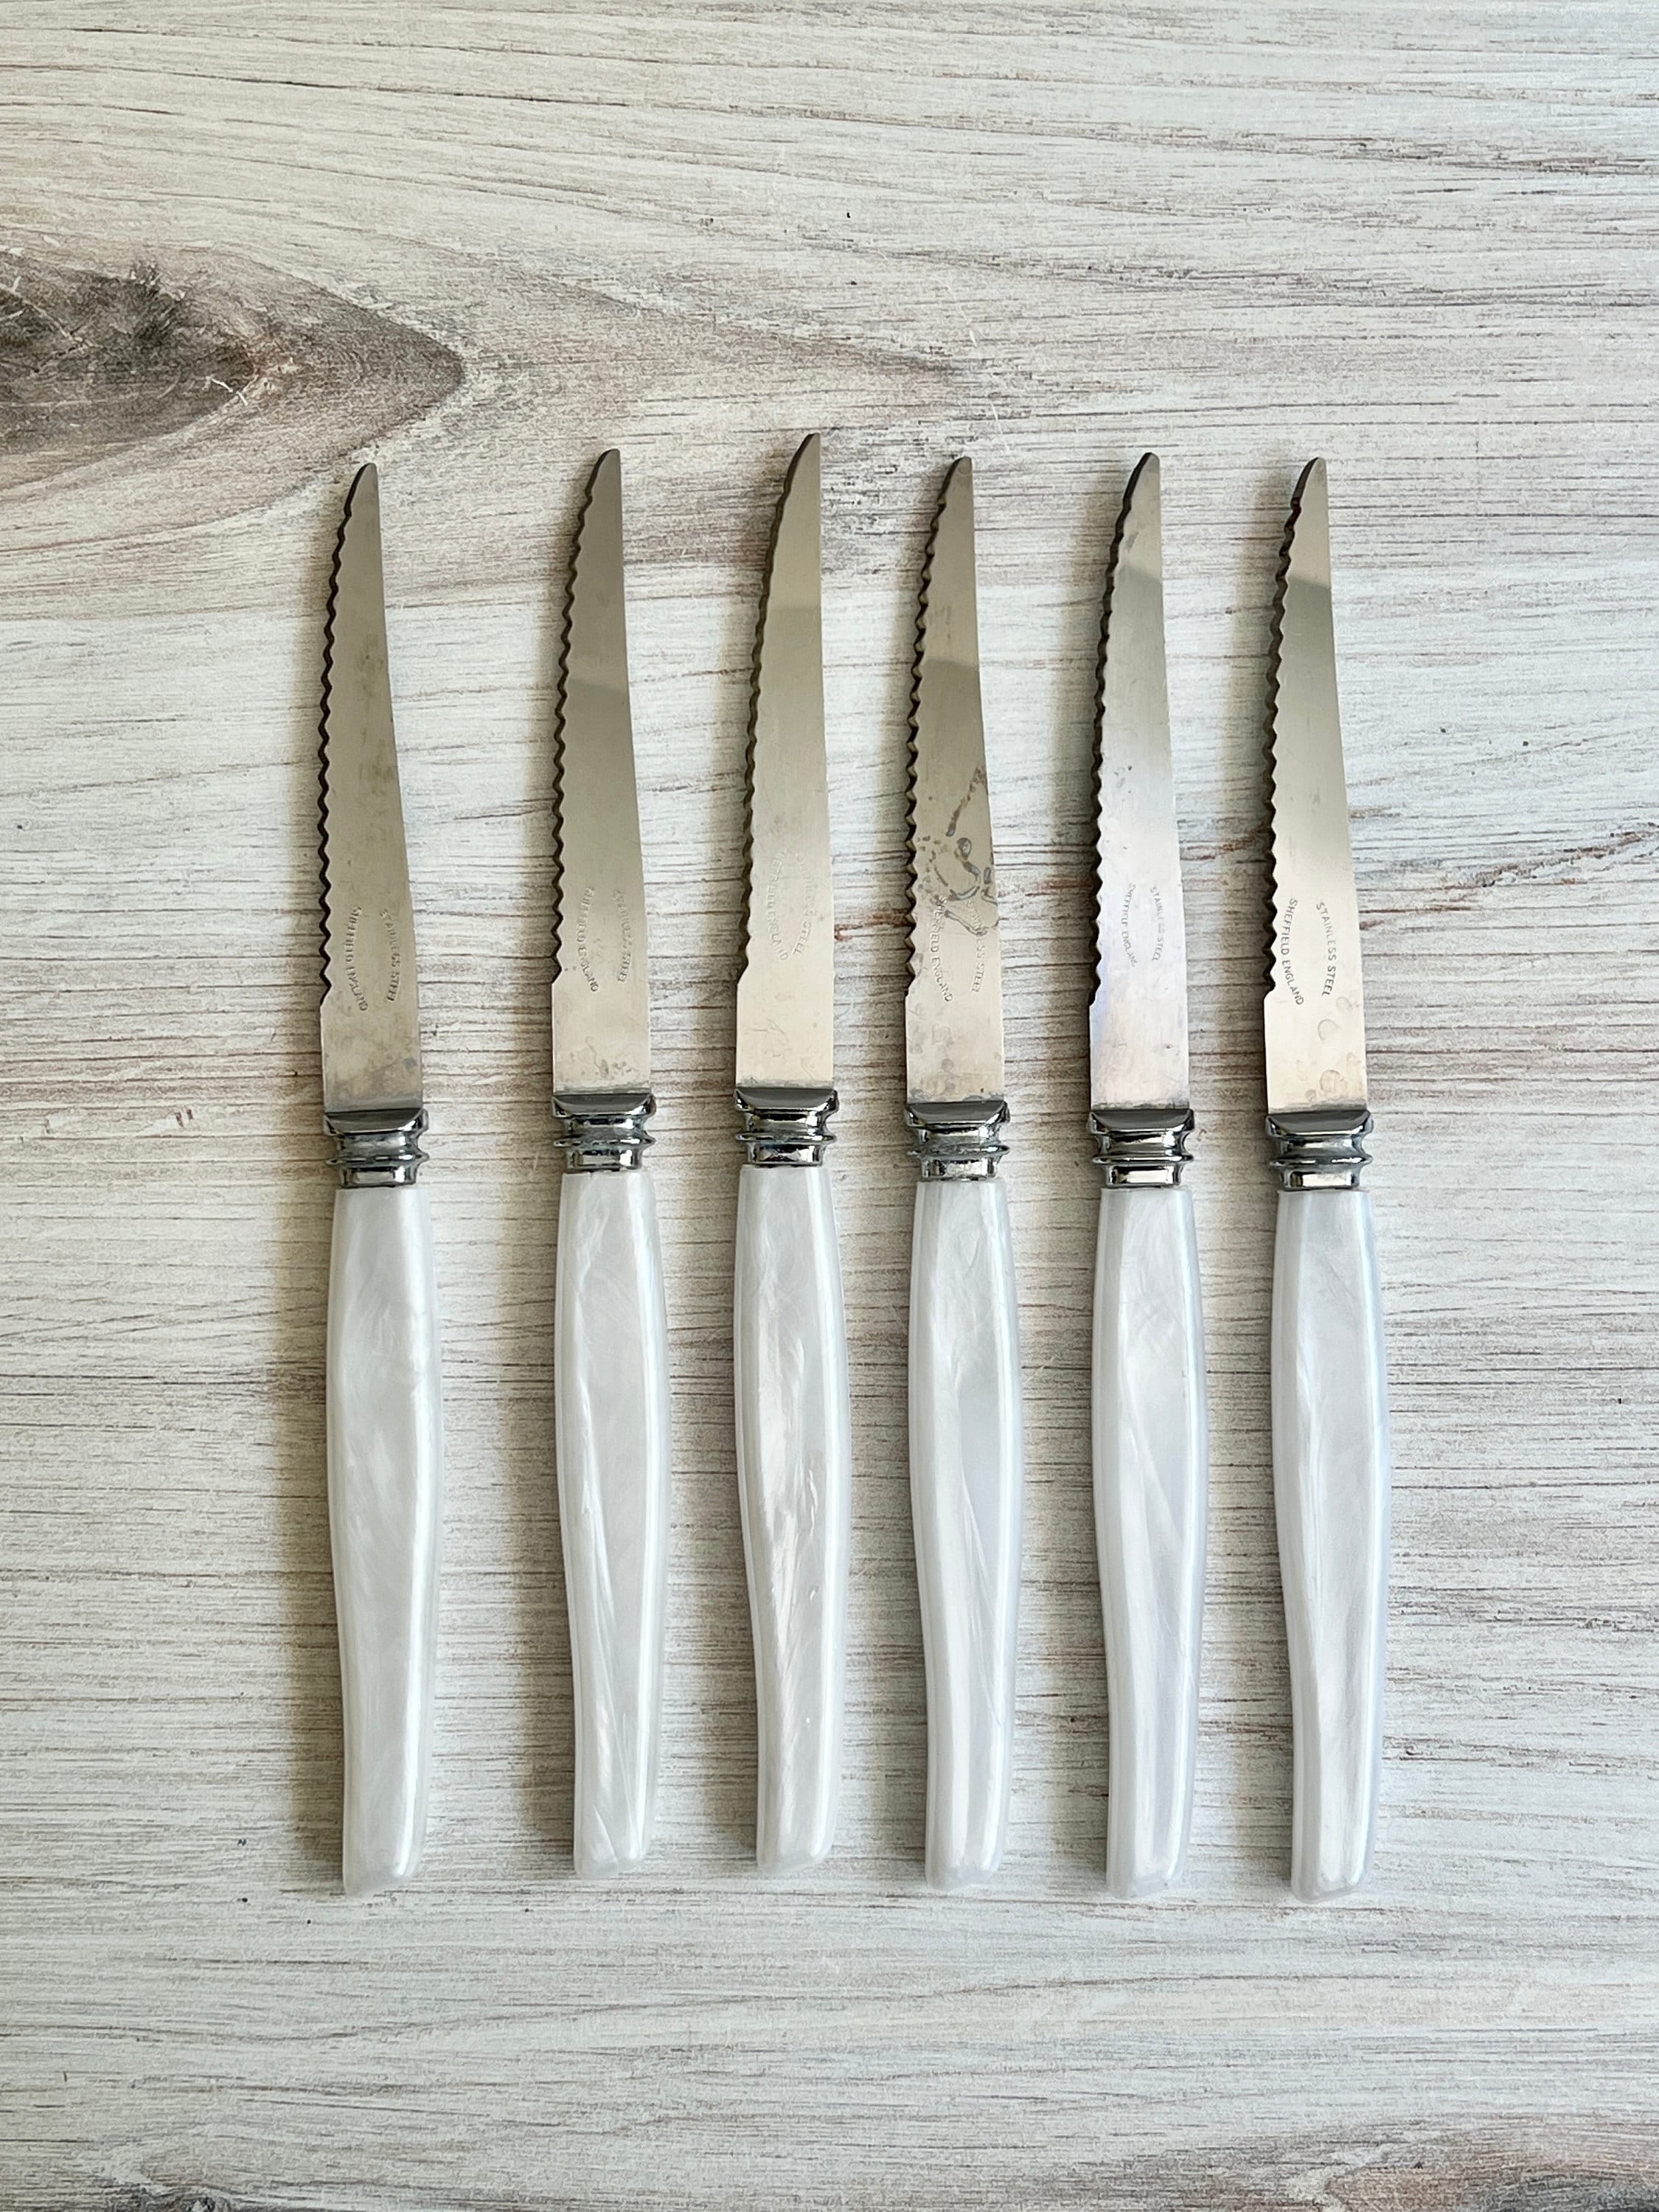 6pcs Stainless Steel Steak Knives Set, Silver / 6 Pieces